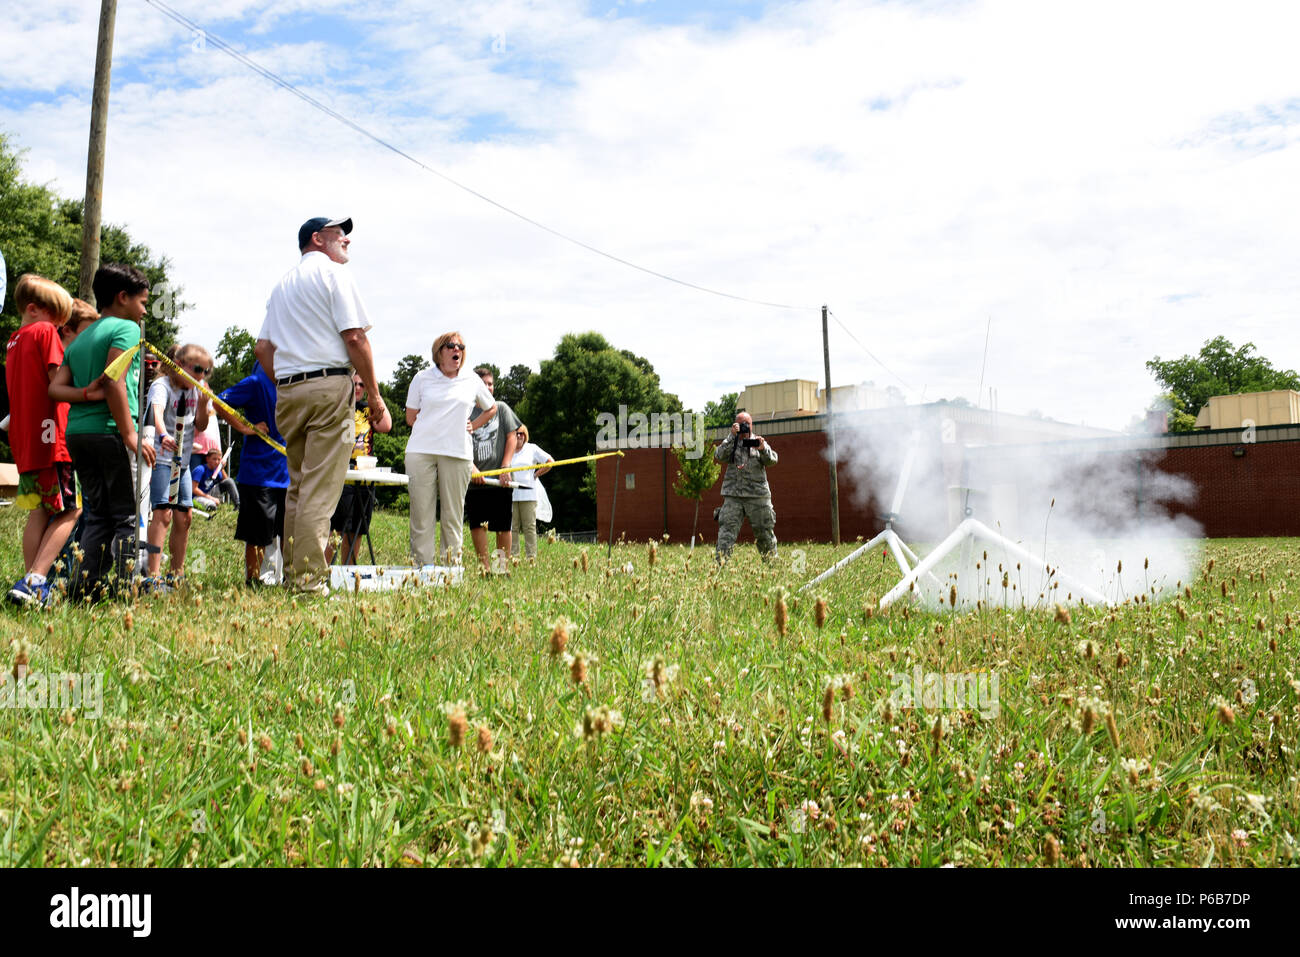 Parents, campers, and teachers watch as model rockets launch near Reid Park Academy Charlotte, N.C., June 21, 2018. The campers and teachers are part of the annual Department of Defense STARBASE summer camp program with the North Carolina Air National Guard and they learn various applications of science, technology, engineering, and math. Stock Photo